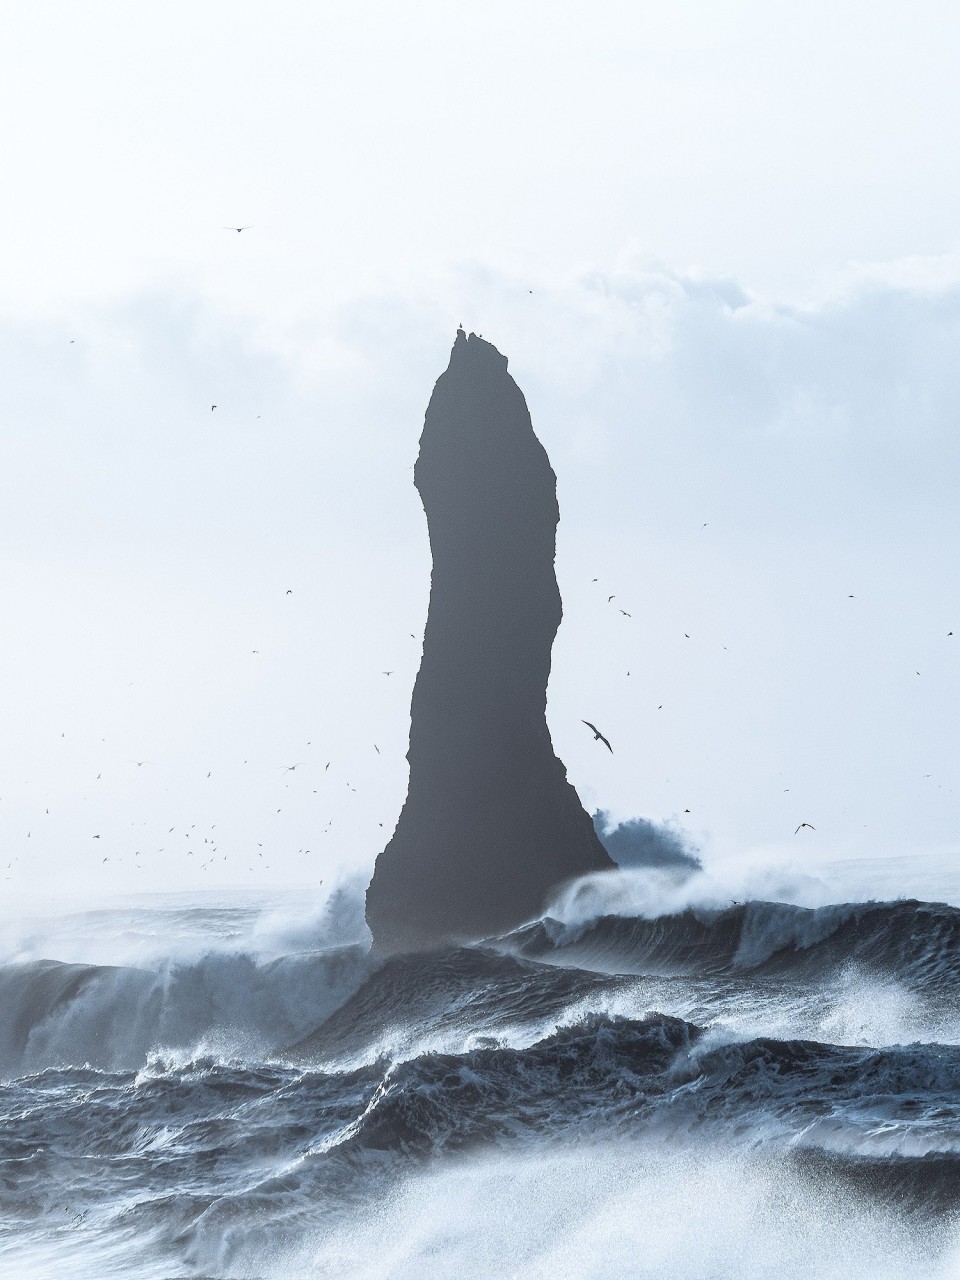 Rough swell in the Atlantic and view of Reynisdrangar